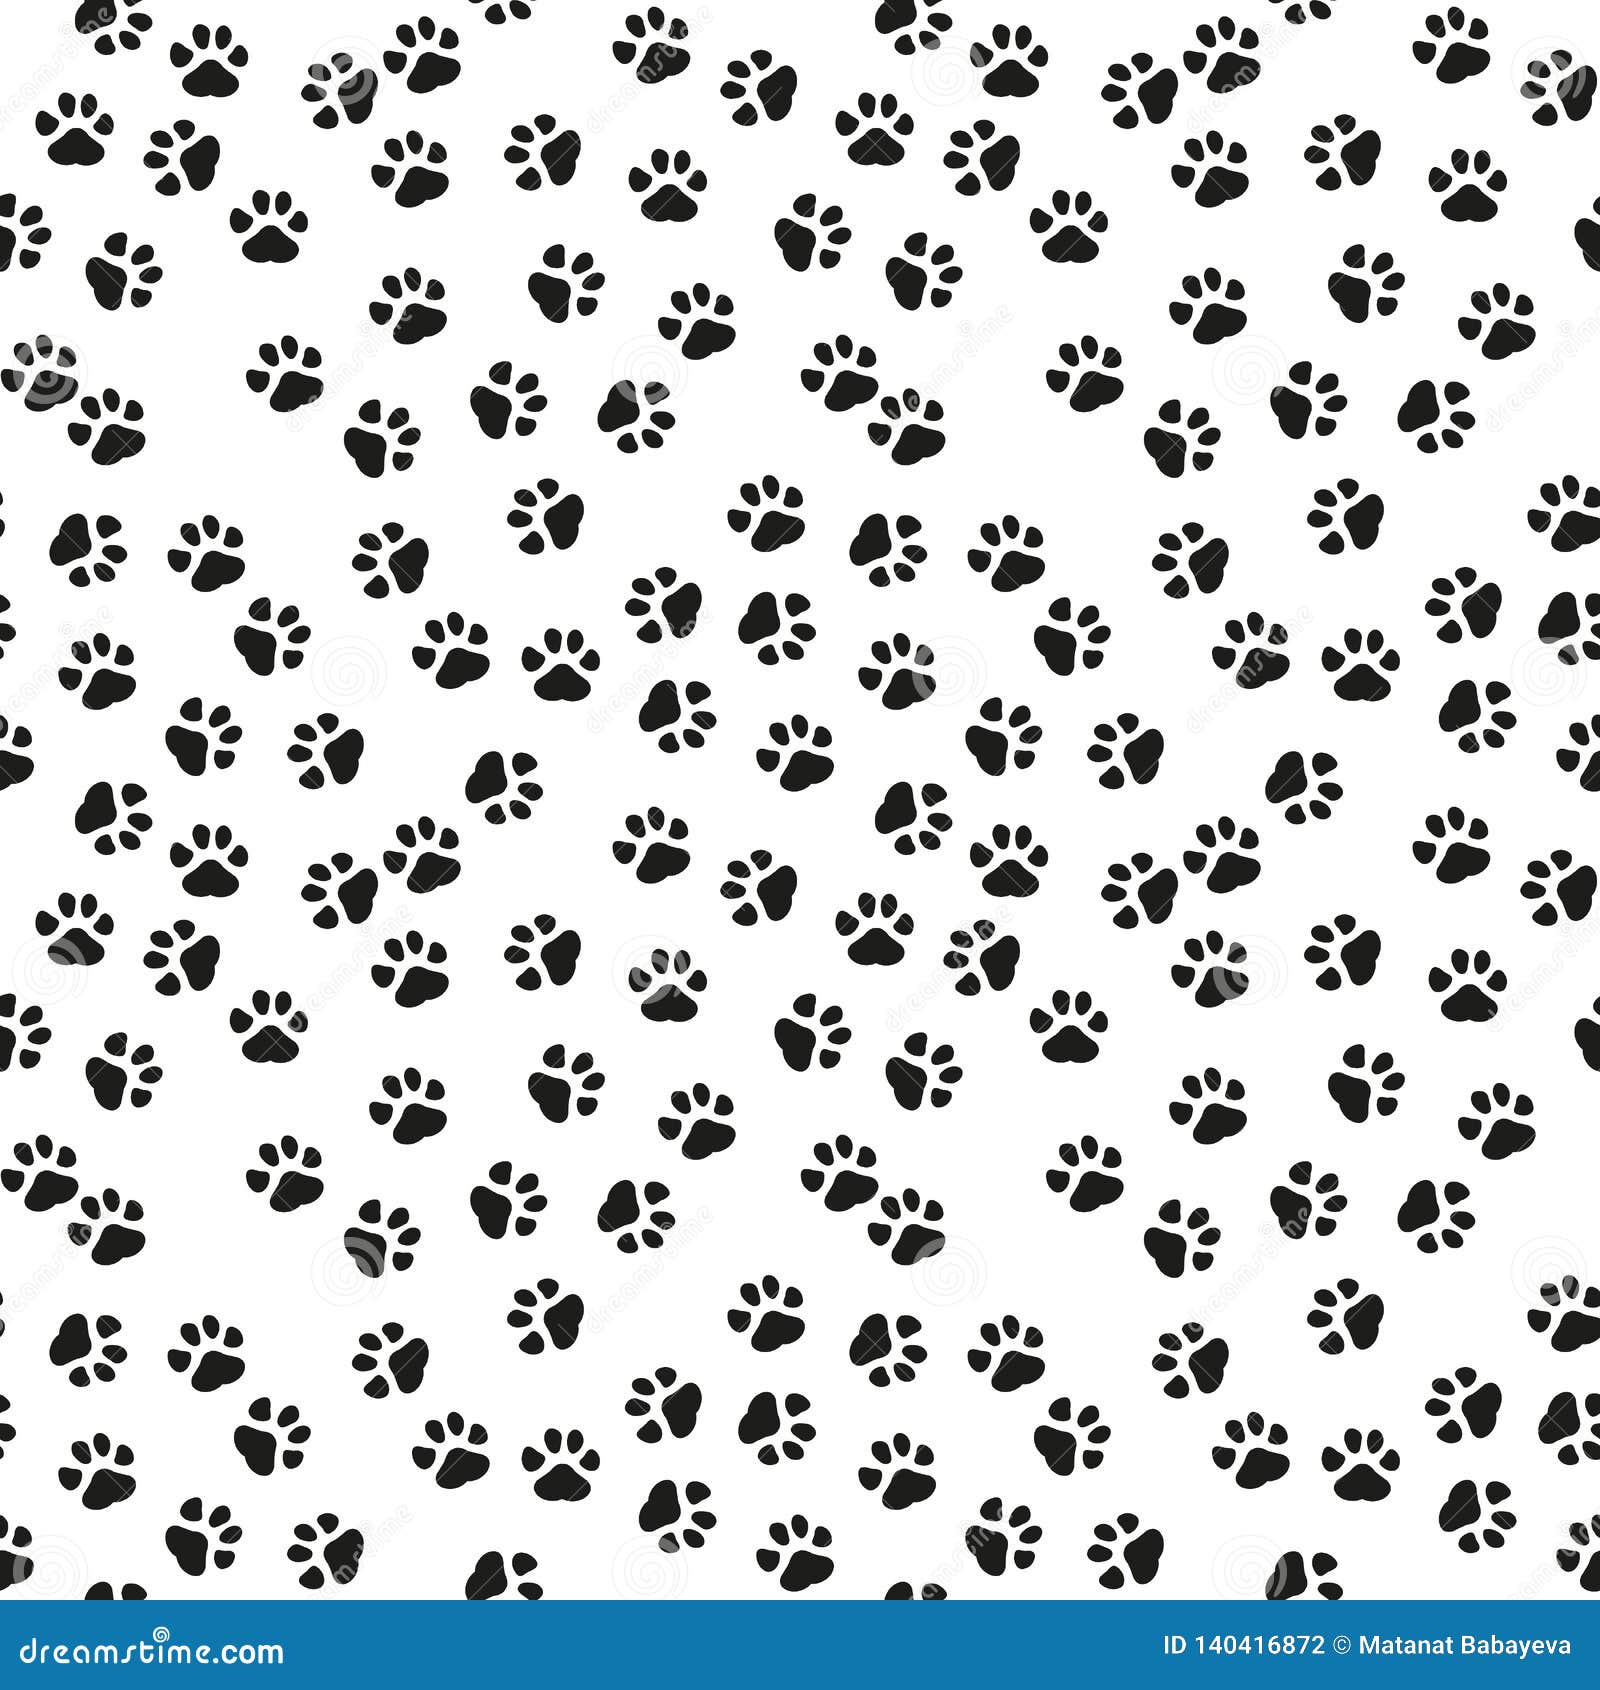 Dog Paw Print Vector Seamless Pattern or Background Stock Illustration